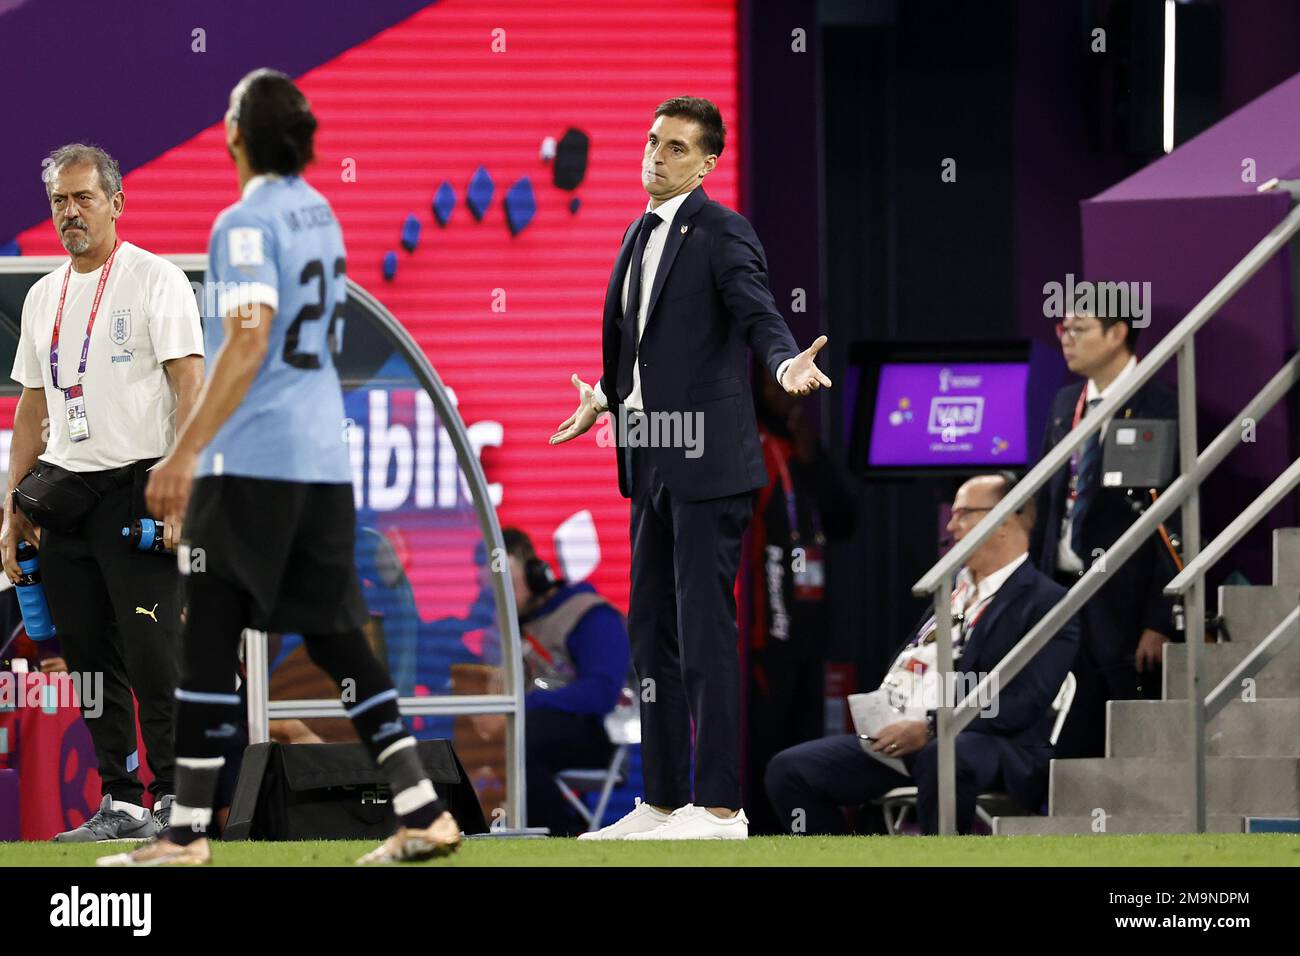 DOHA - Uruguay coach Diego Alonso during the FIFA World Cup Qatar 2022 group H match between Uruguay and South Korea at Education City Stadium on November 24, 2022 in Doha, Qatar. AP | Dutch Height | MAURICE OF STONE Stock Photo